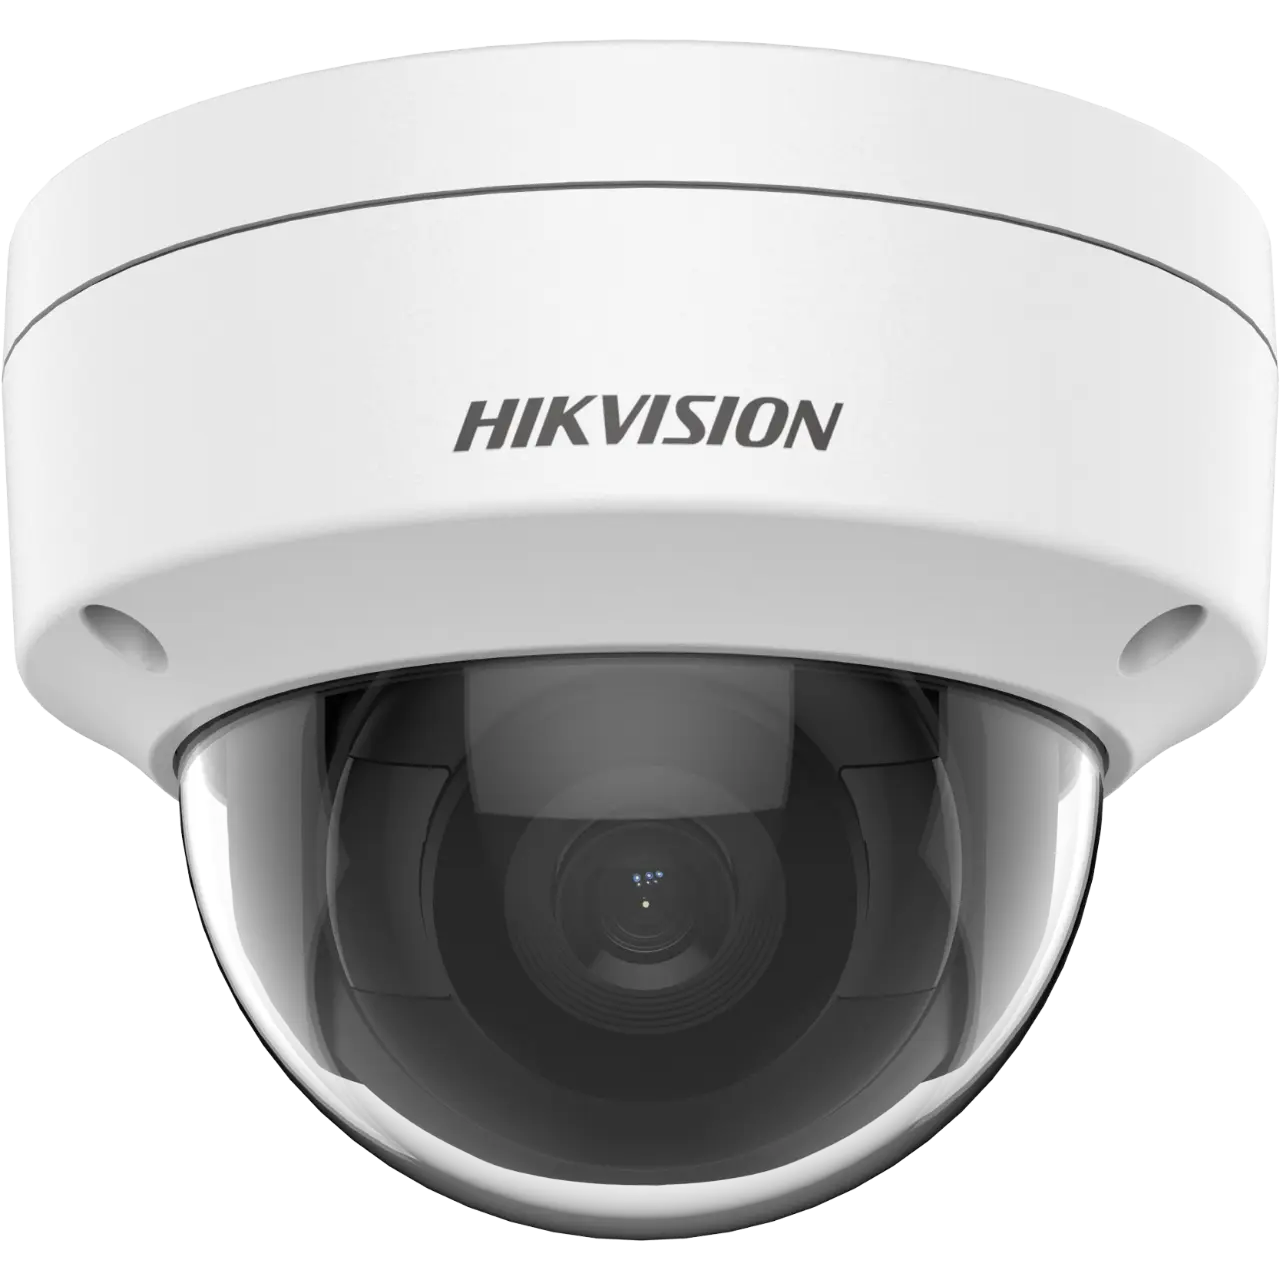 HIKVISION 4MP FIXED DOME NETWORK CAMERA (DS-2CD1143G0-I 4MM)